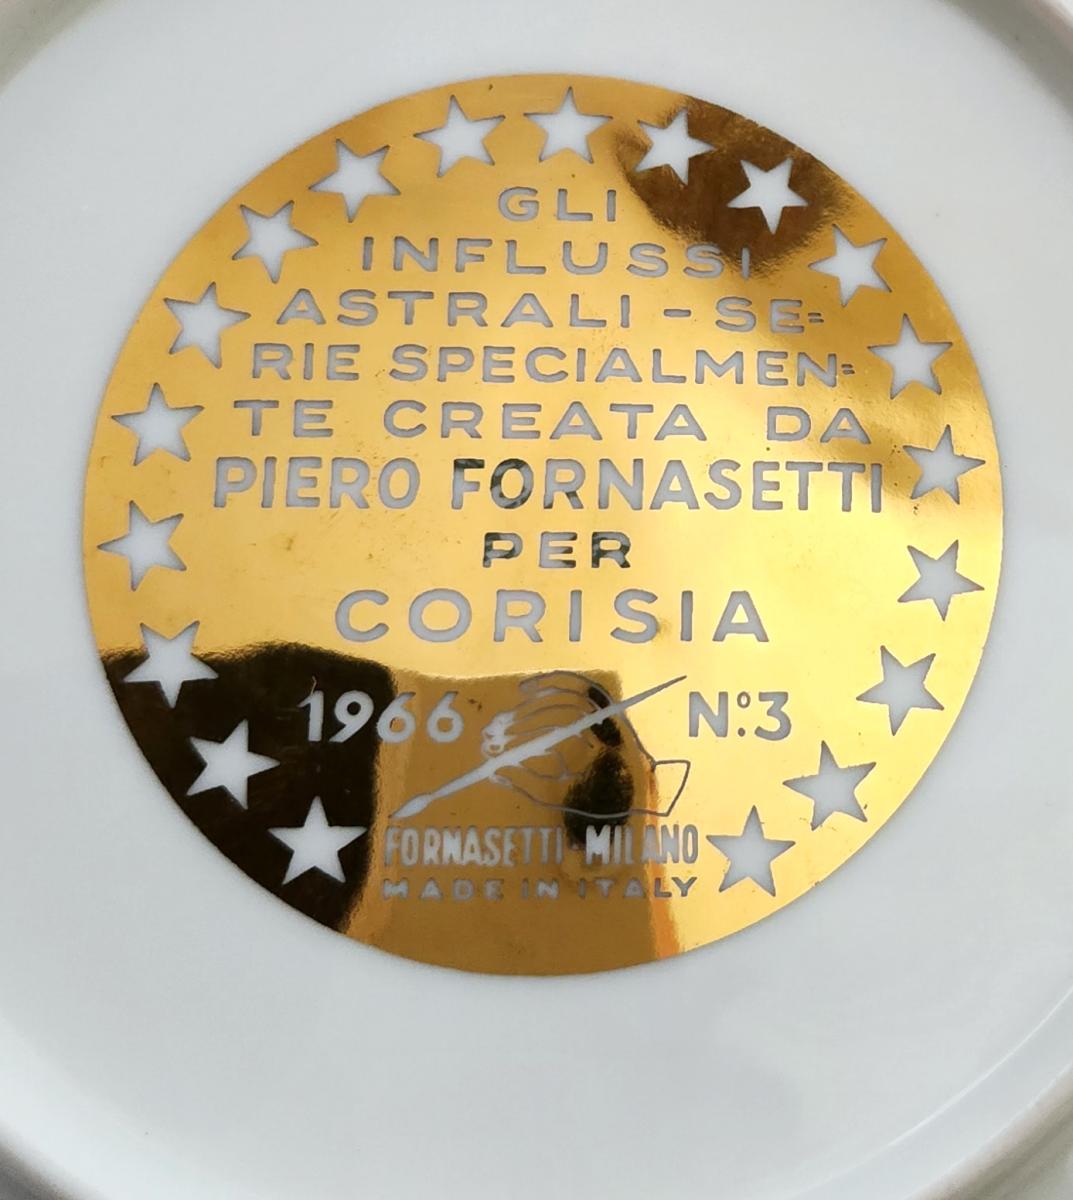 Piero Fornasetti Zodiac Porcelain Plate, Astrological Sign- Aquarius, Astrali Pattern, Number 3 Made for Corisia in 1966.